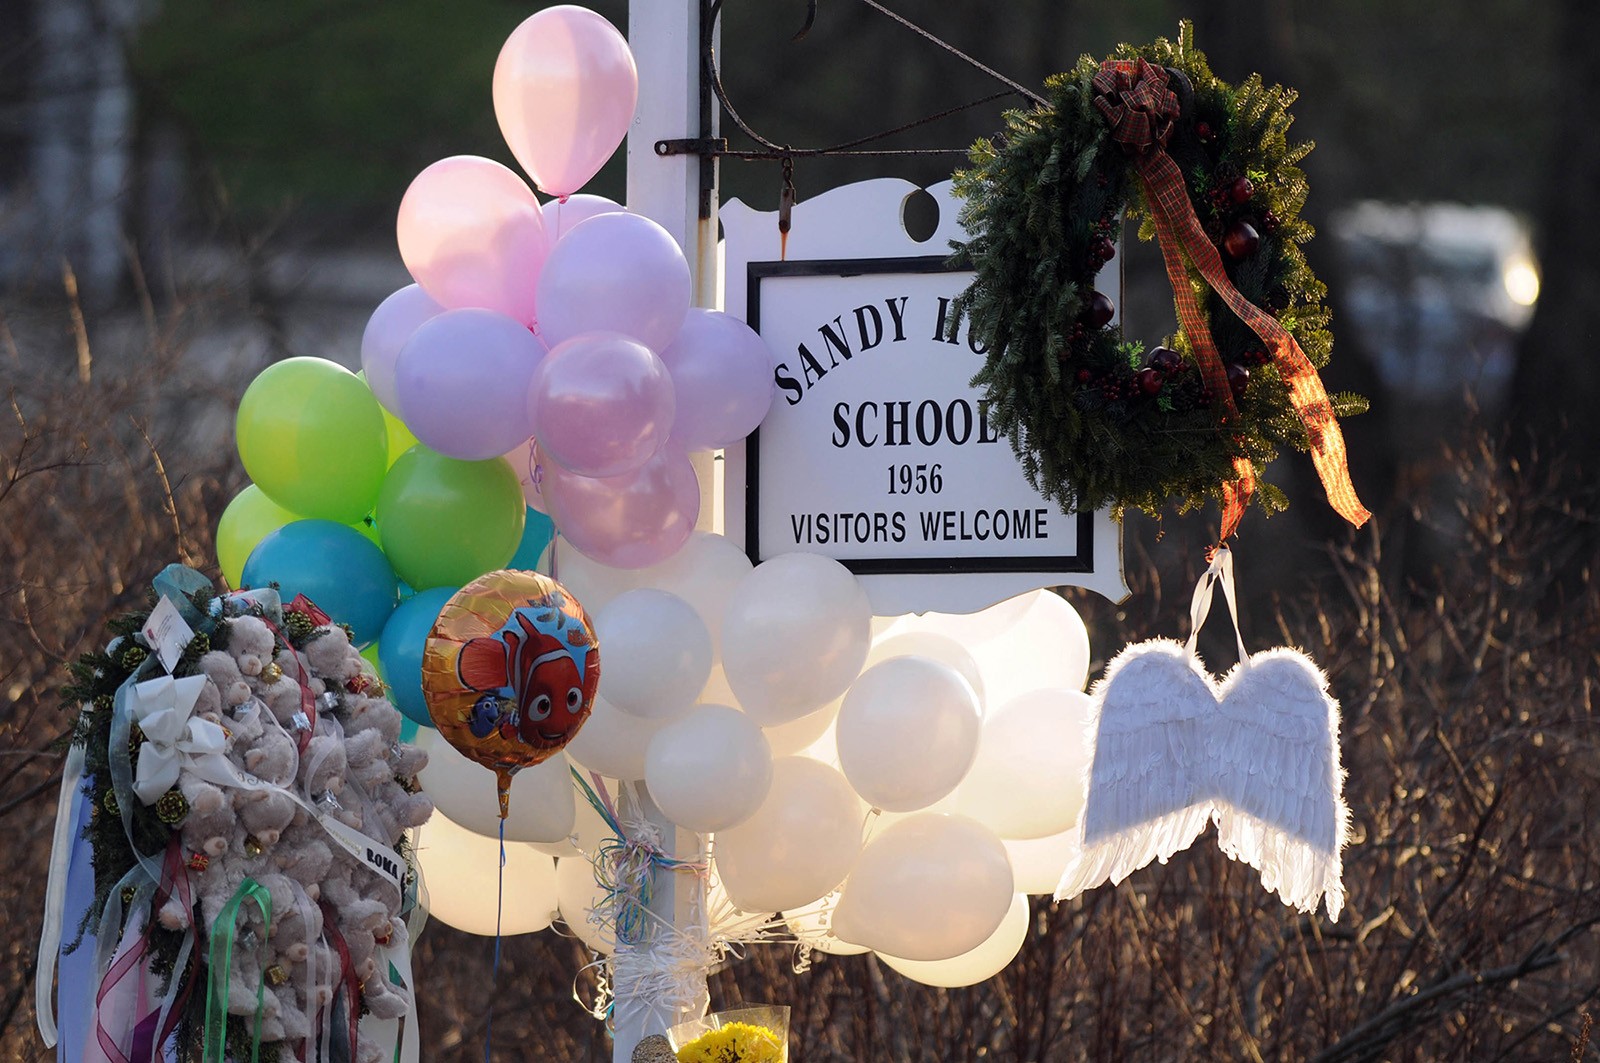 Flowers, teddy bears, candles, balloons and a pair of angel wings left by mourners are seen at the Sandy Hook Elementary School sign. Photo: TNS